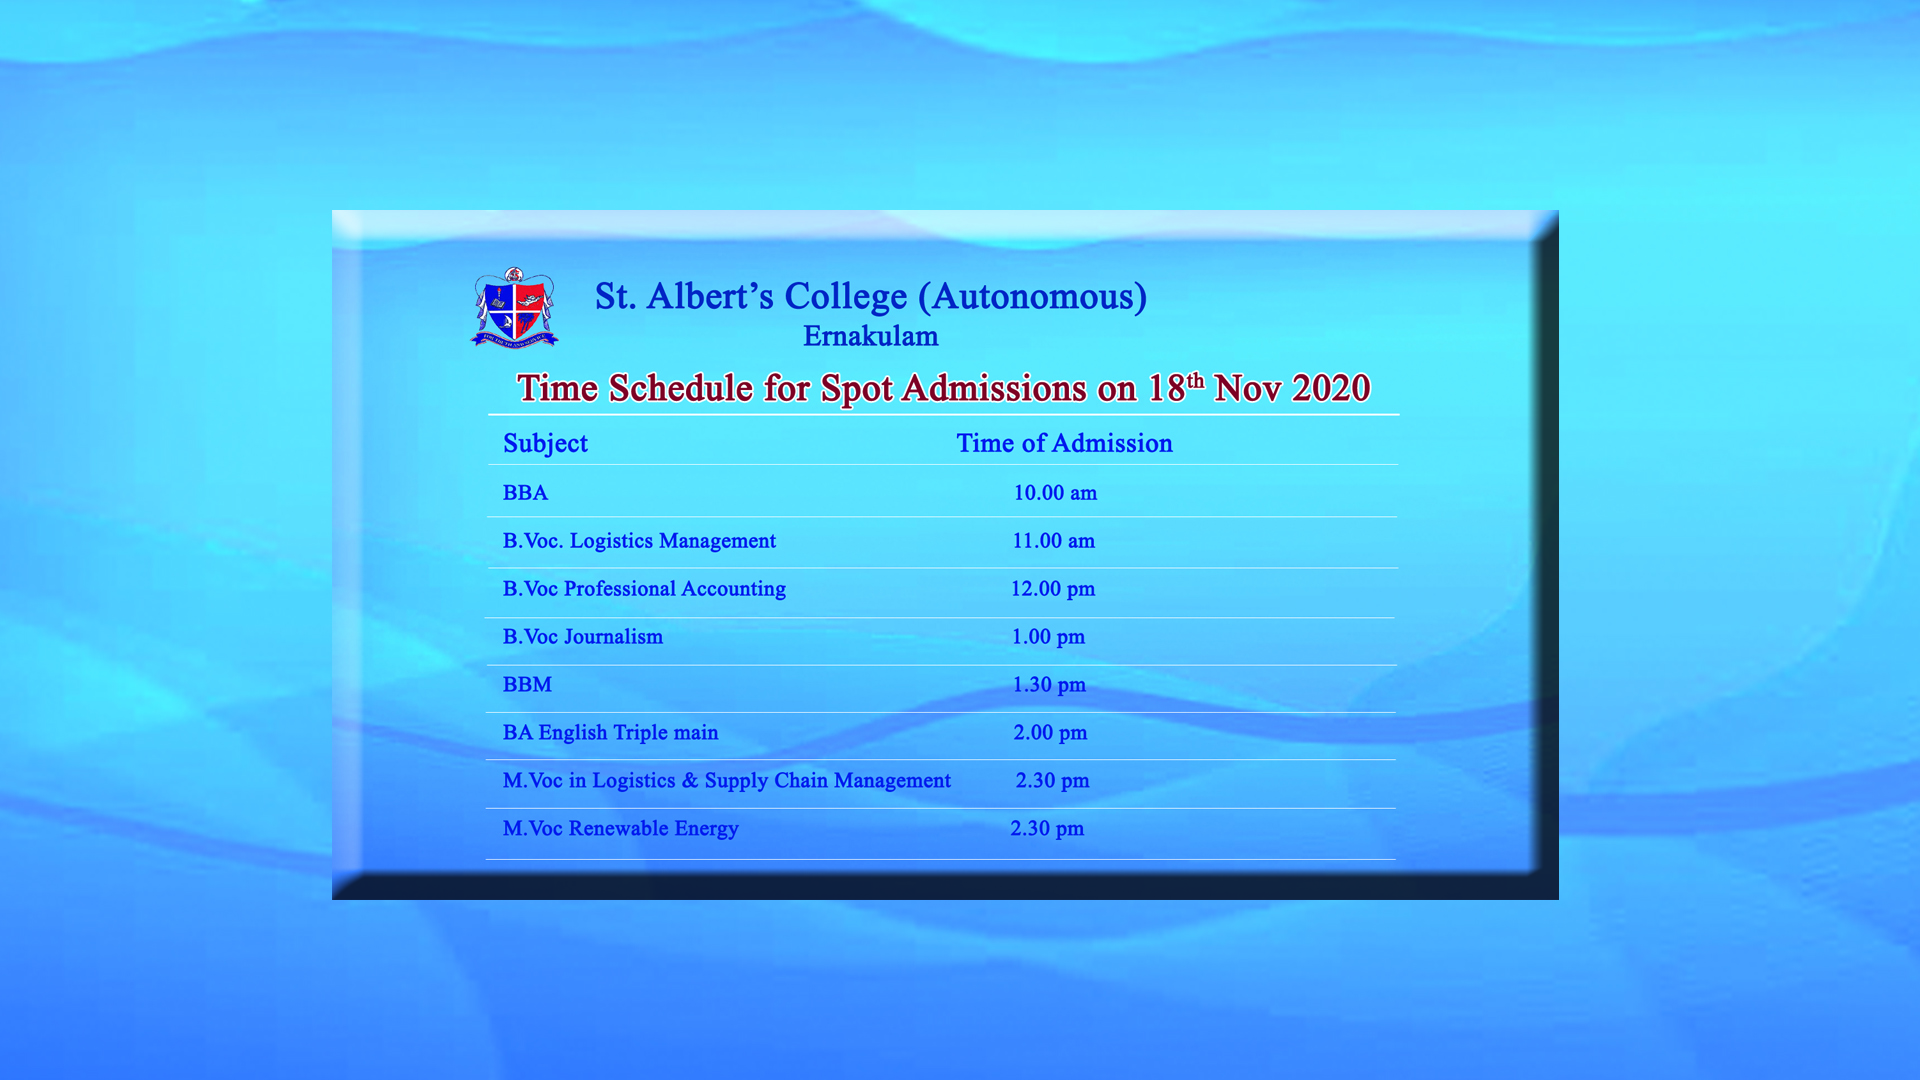 Time schedule for spot admissions